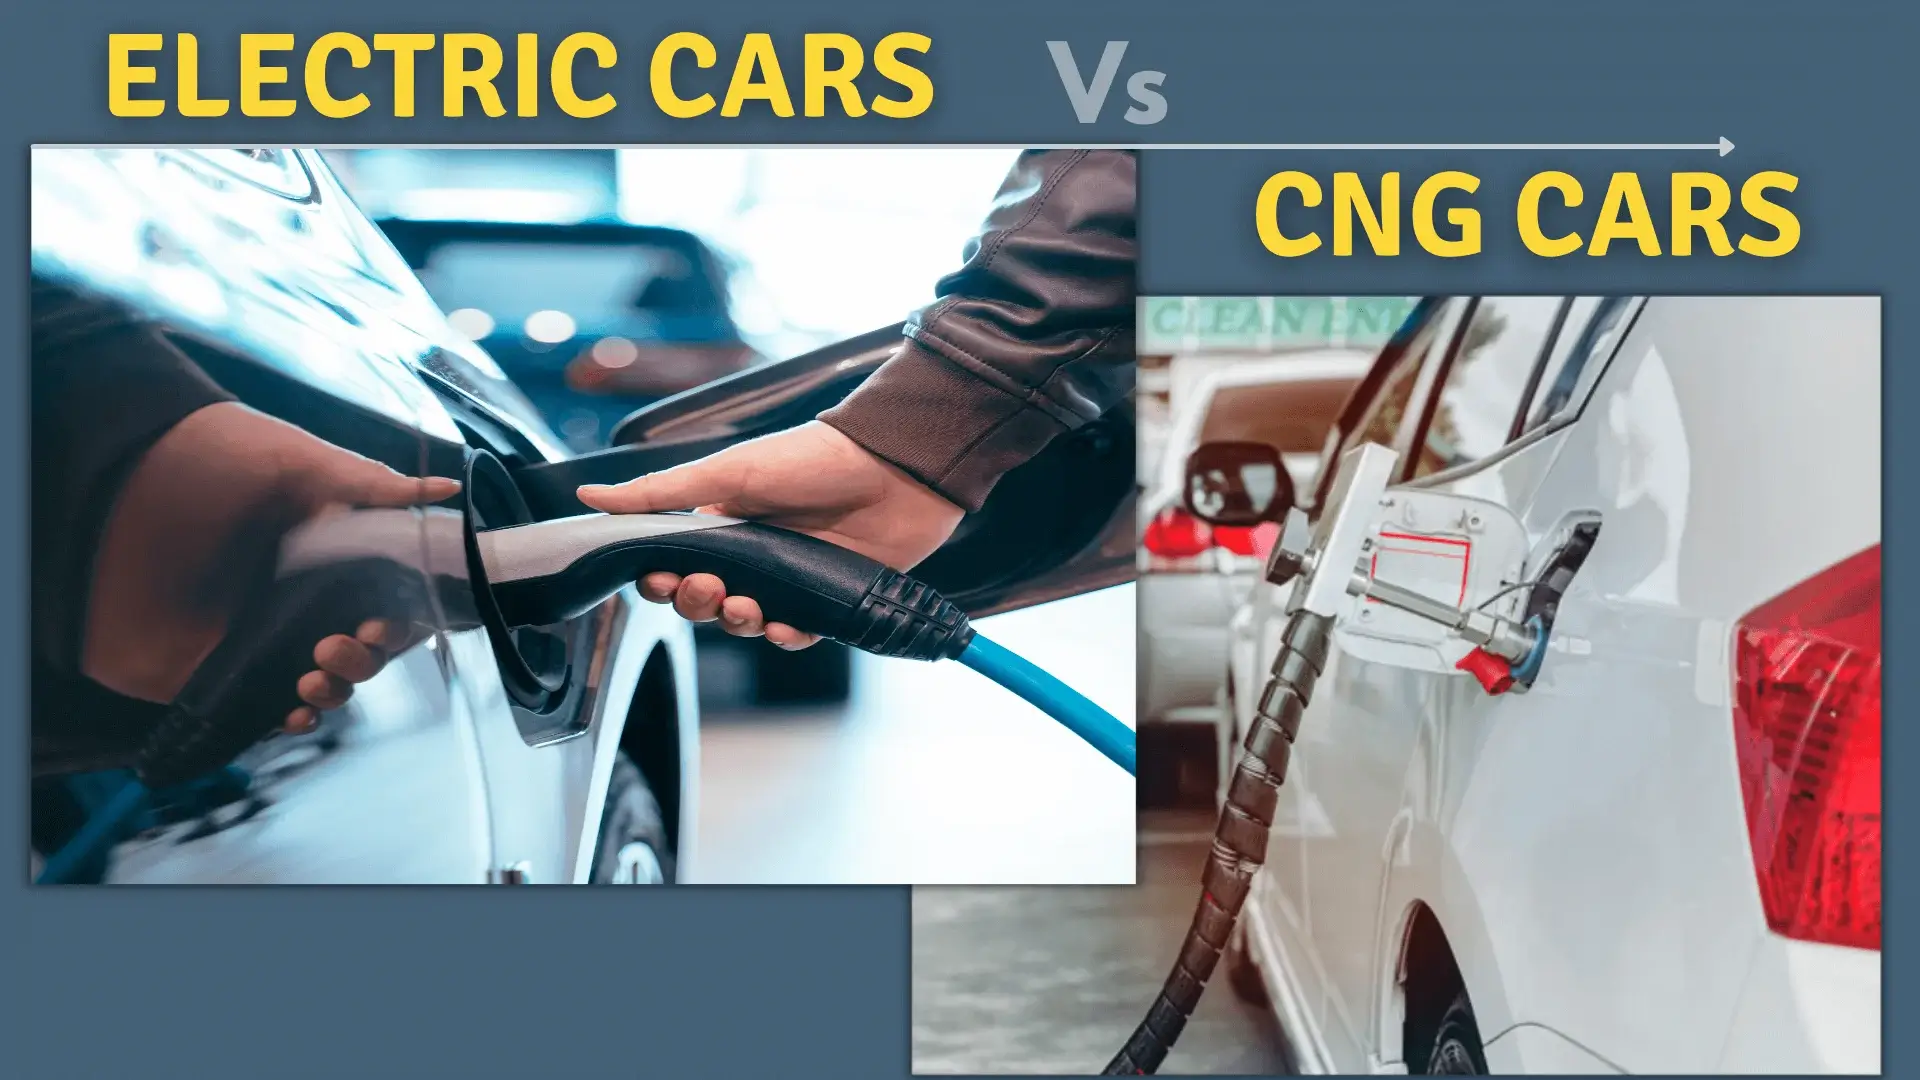 https://e-vehicleinfo.com/electric-cars-vs-cng-cars-which-is-more-sustainable/